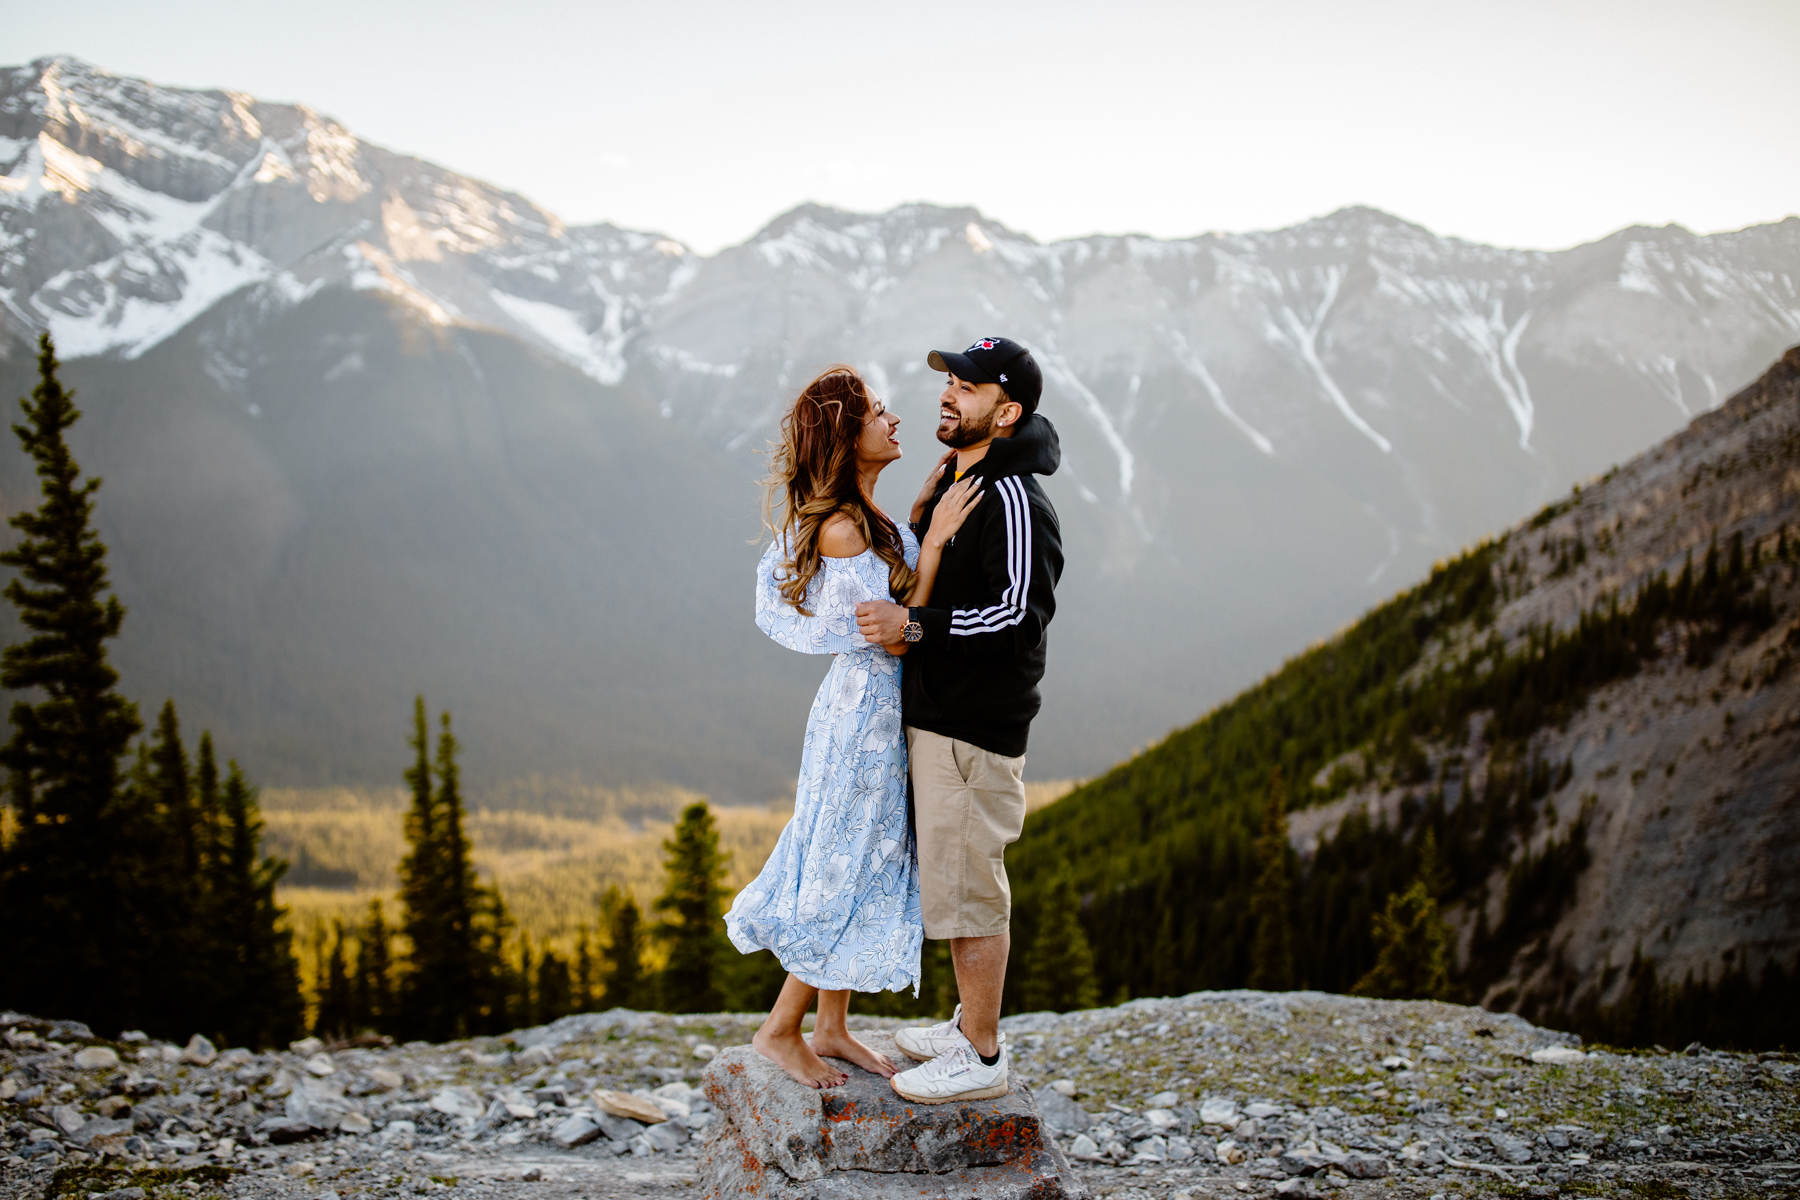 Surprise Proposal Photographers in Banff - Photo 5